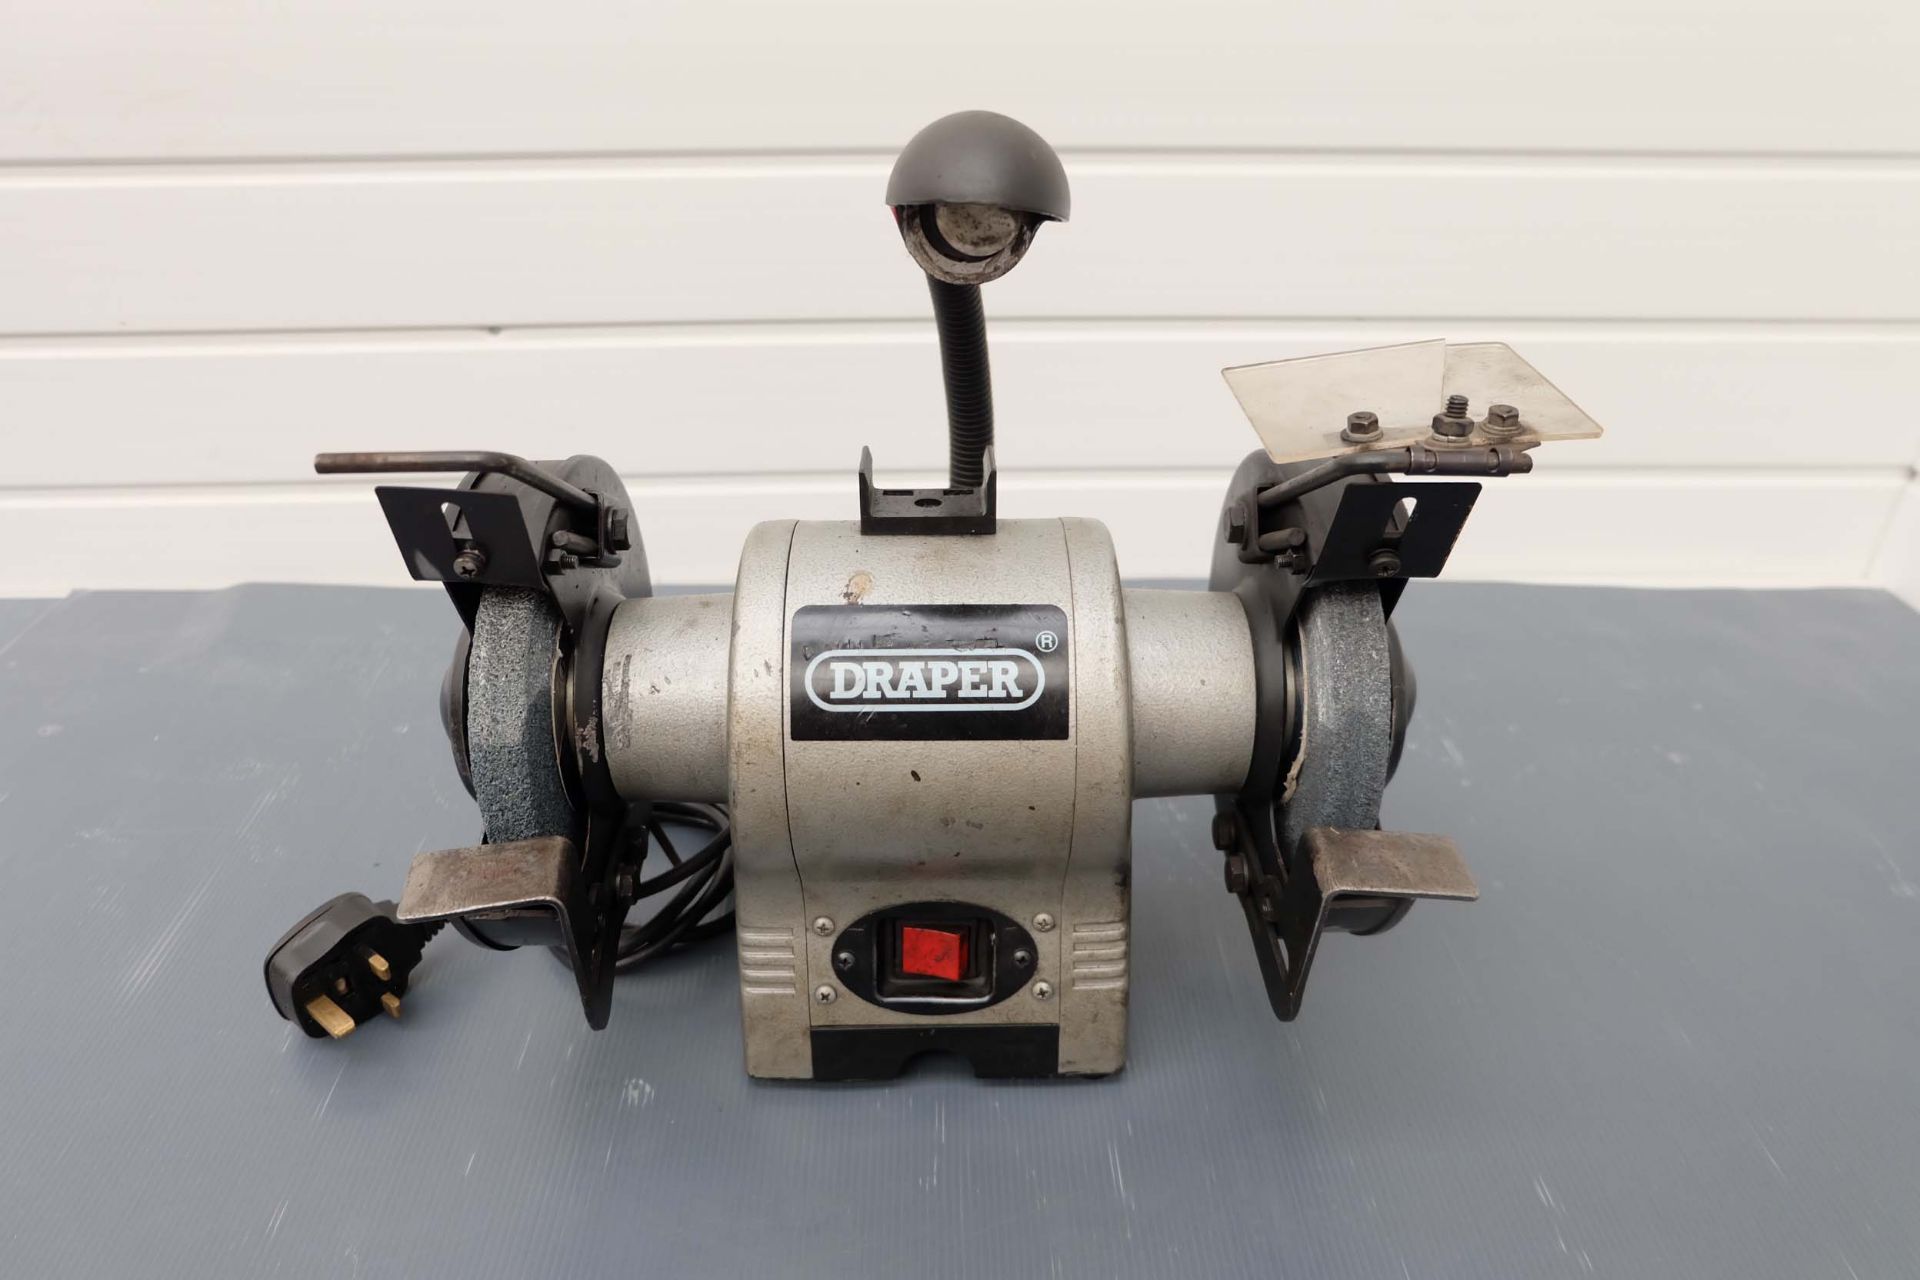 Draper GHD151L Double Ended Bench Grinder. Wheel Size 150mm. Single Phase 240V.